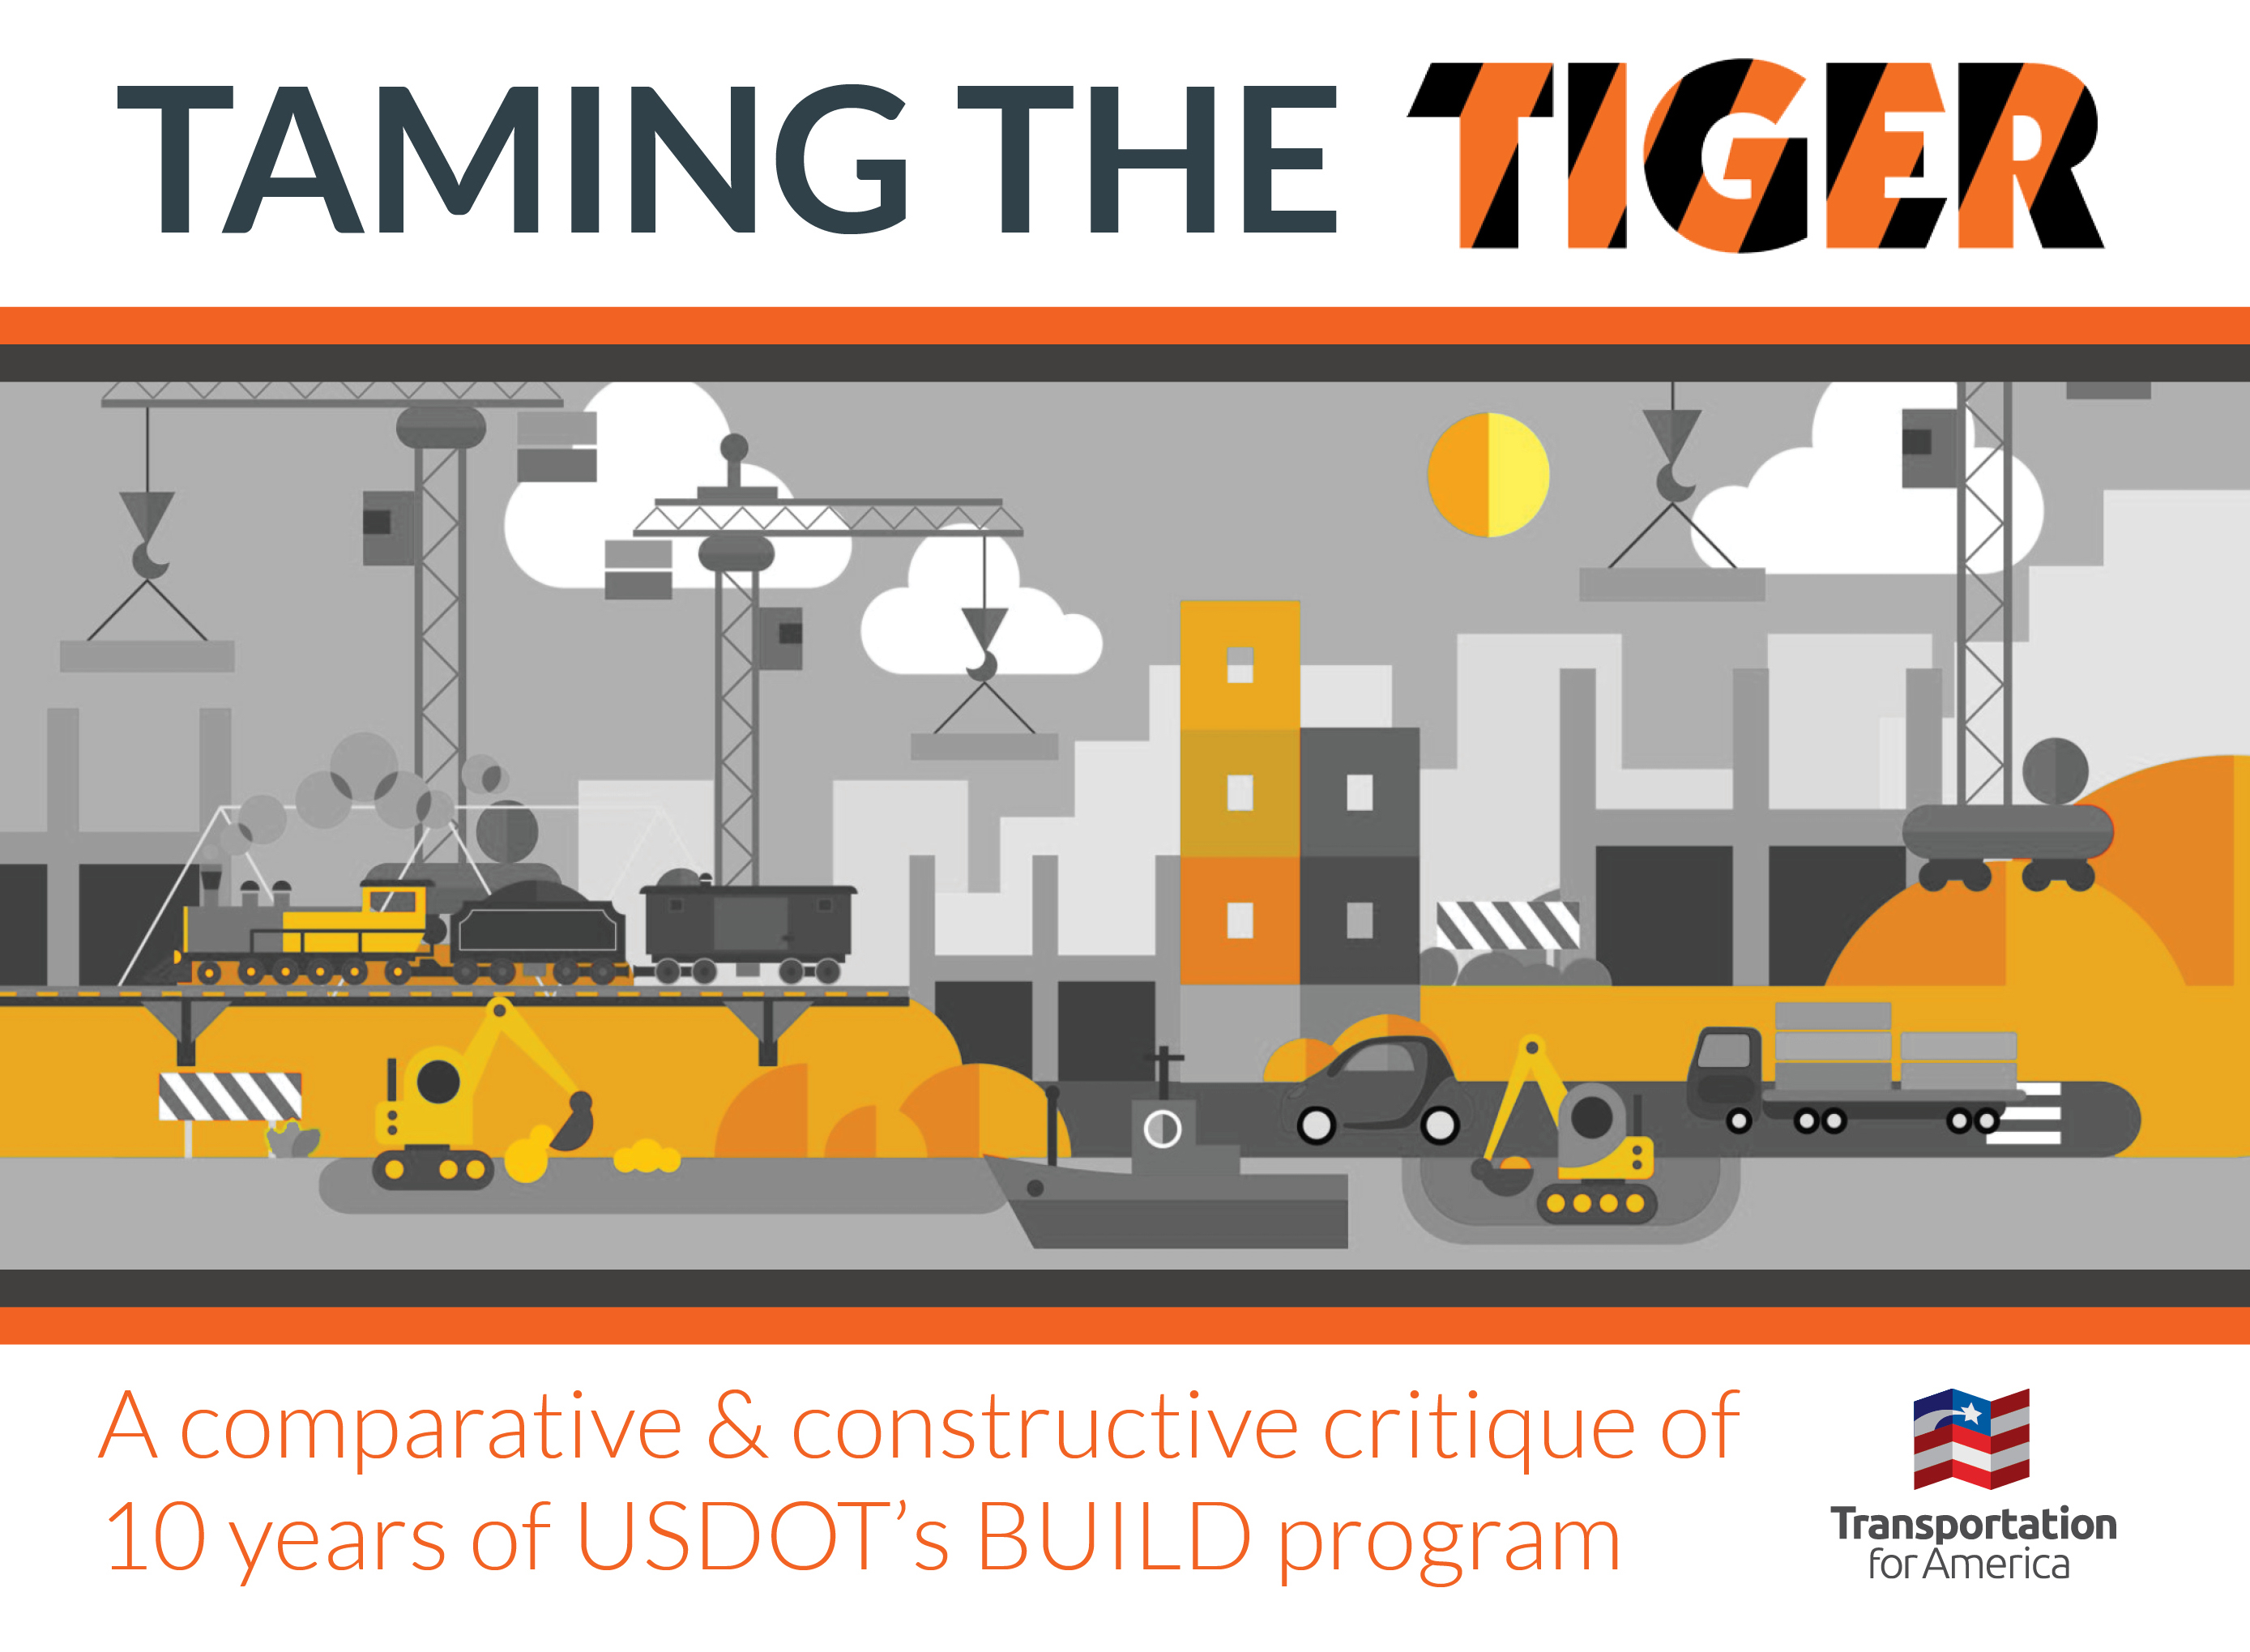 Taming the TIGER: Trump turns innovative program into another roads program